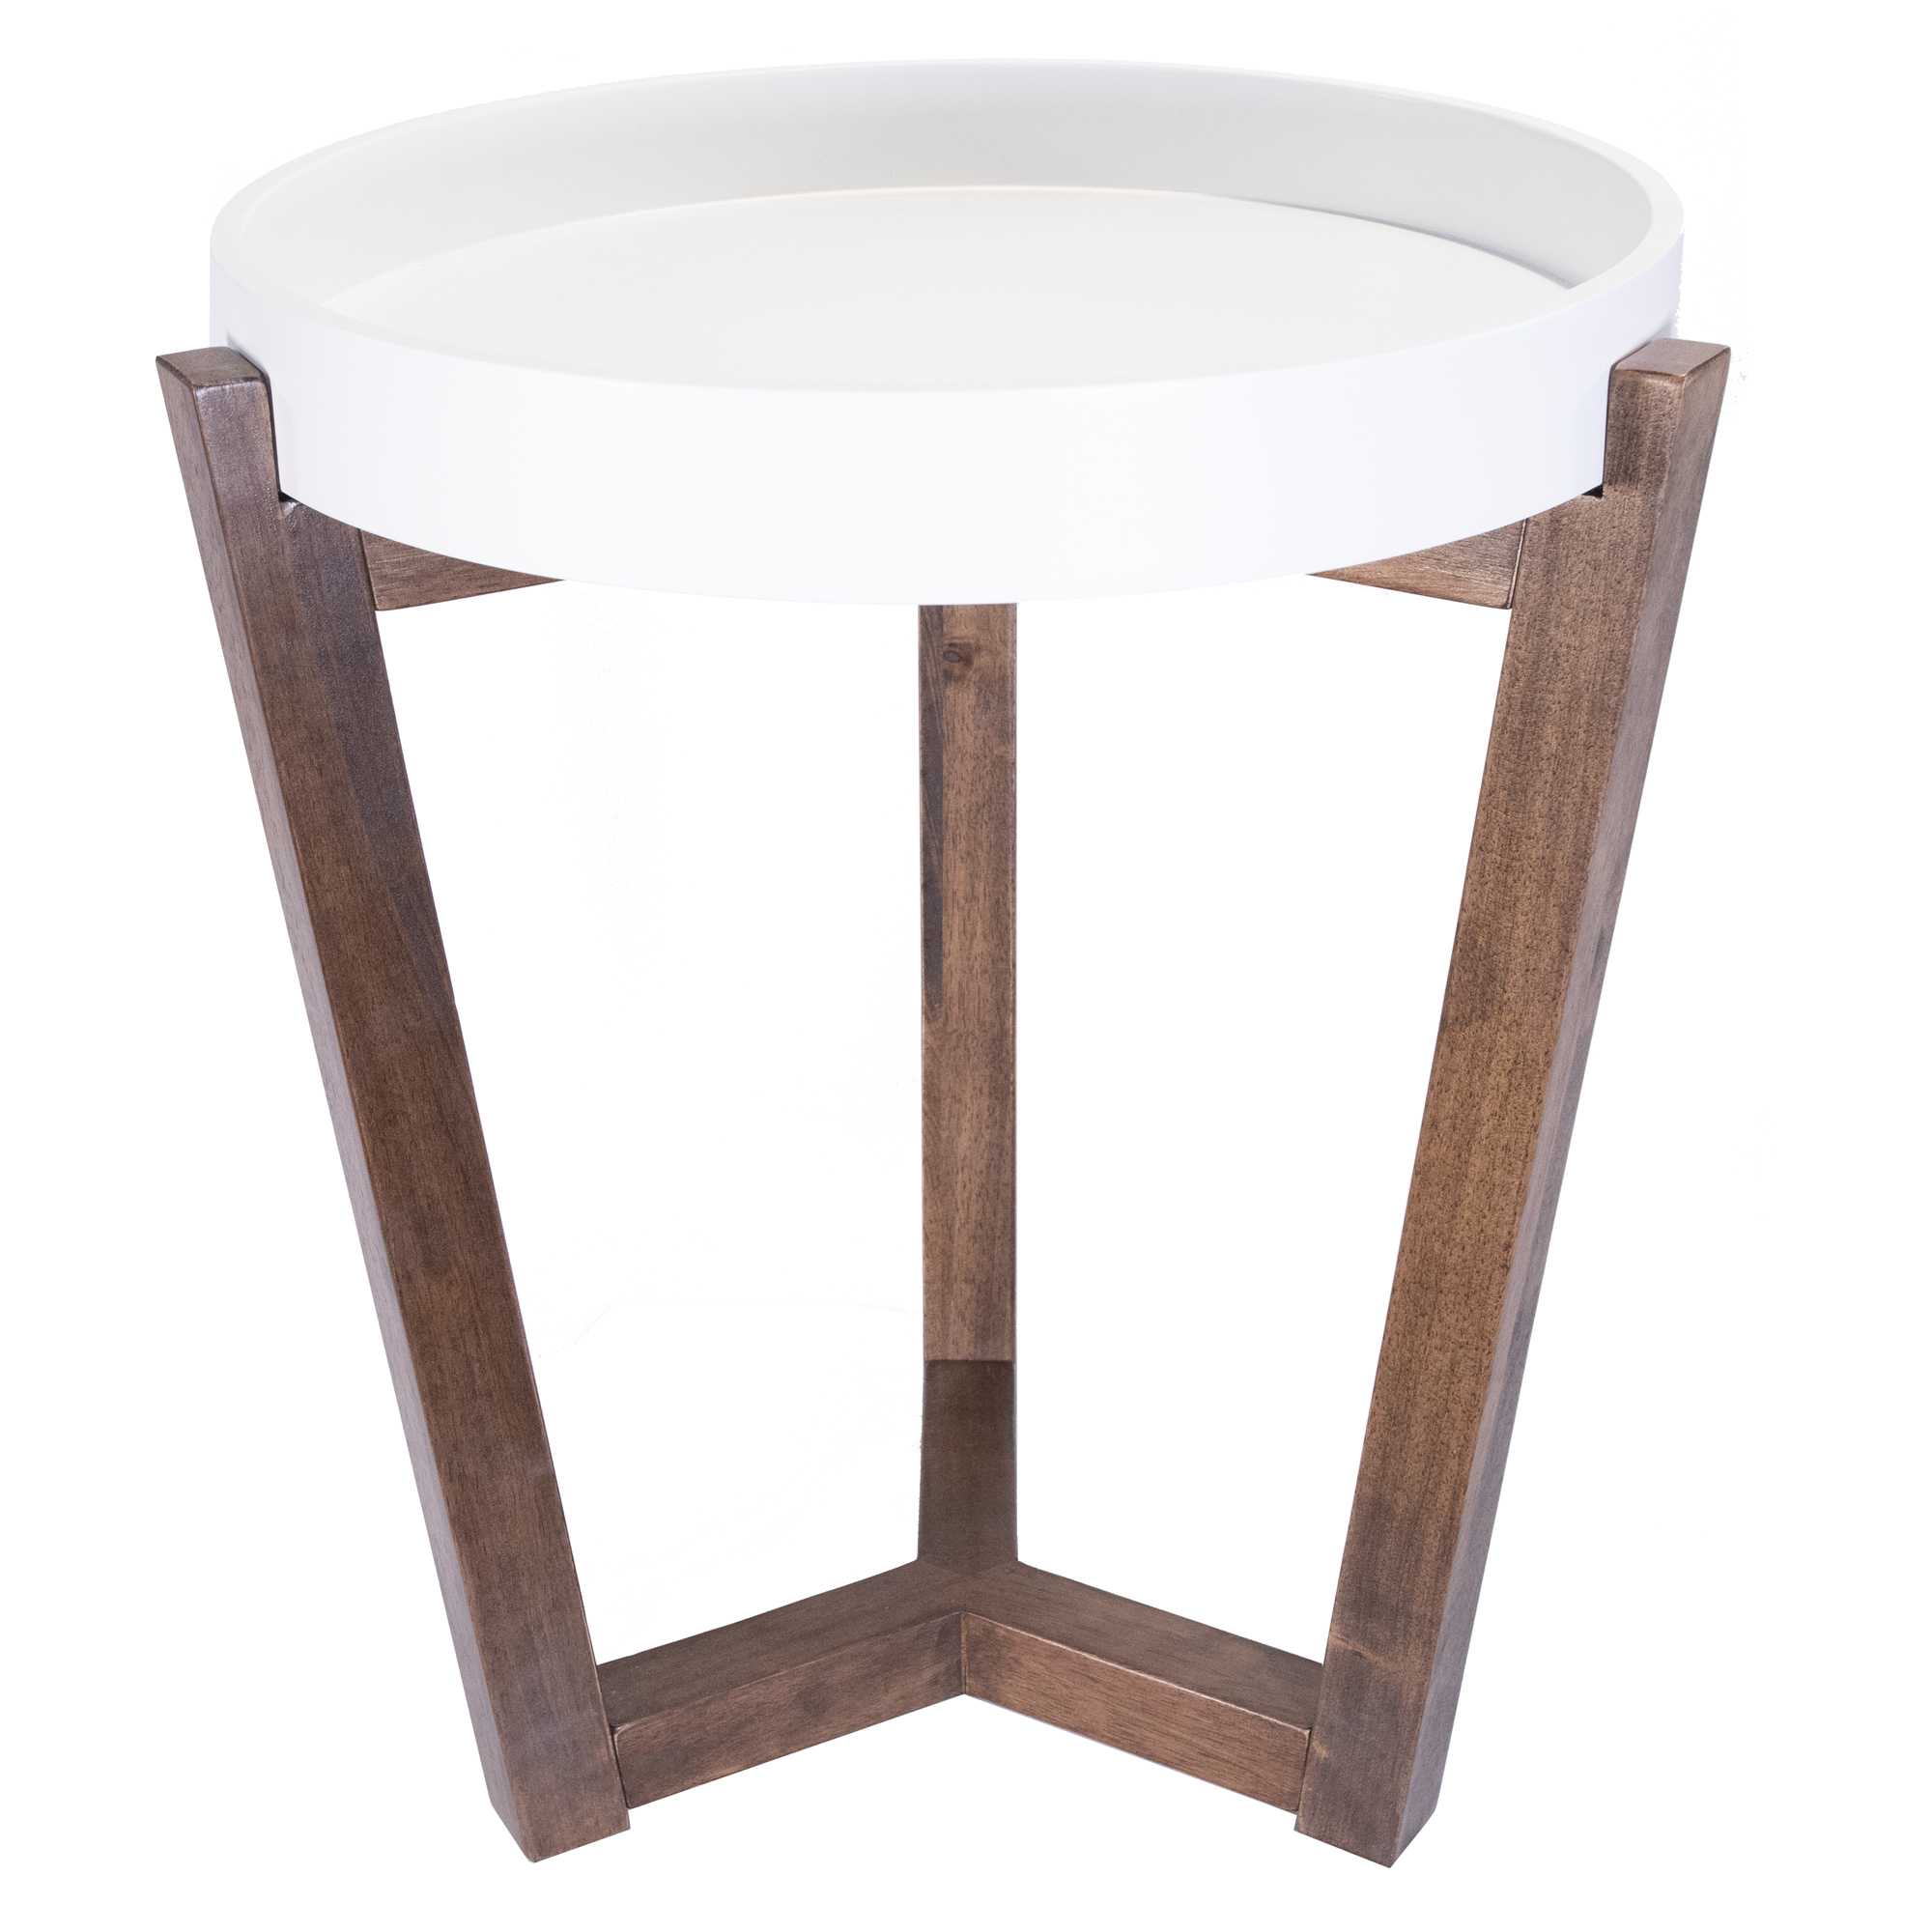 16" X 16" X 20" White & Mocha Solid Wood Round Table